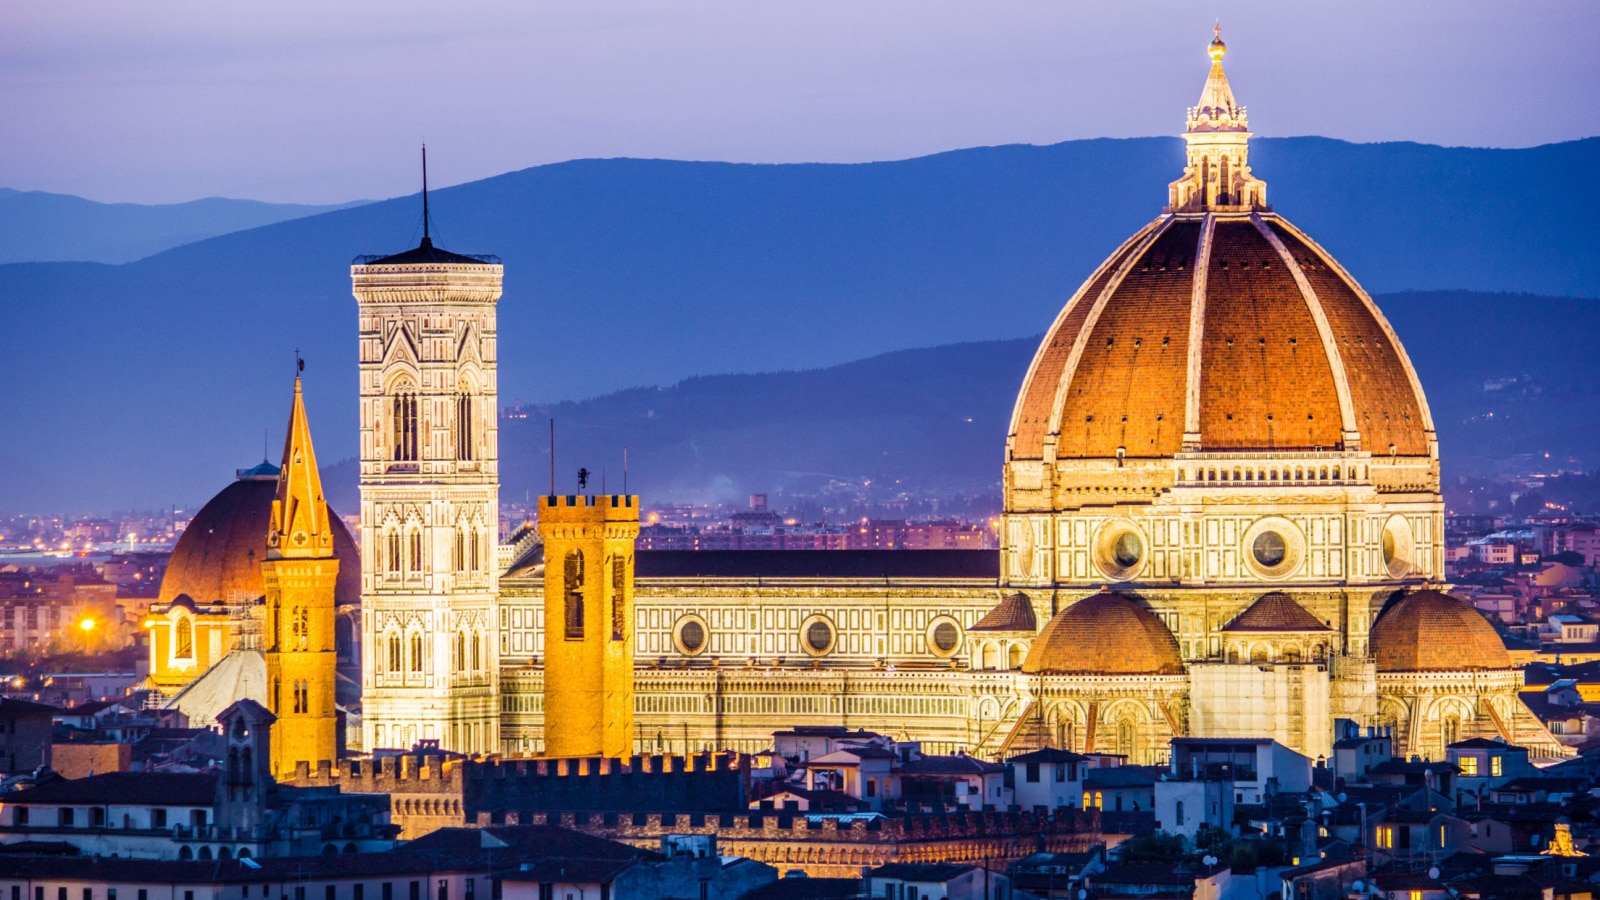 Florence, Italy - The Cathedral and the Brunelleschi Dome at sunset